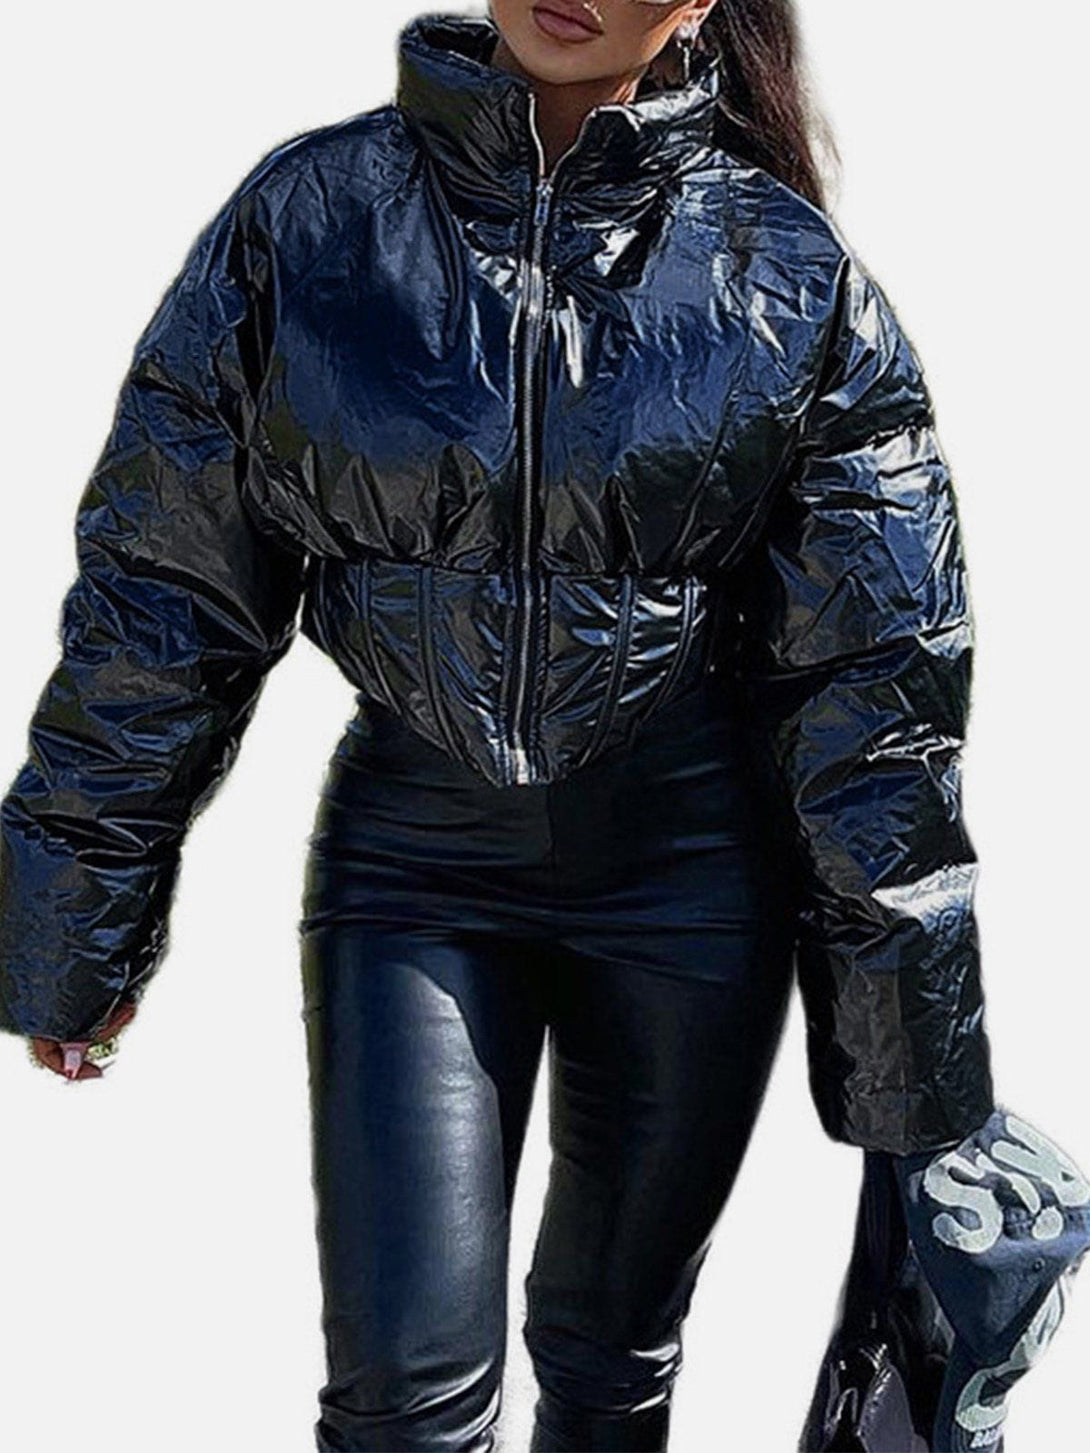 Levefly - Solid Color Gloss Water Resistant Short Winter Coat - Streetwear Fashion - levefly.com